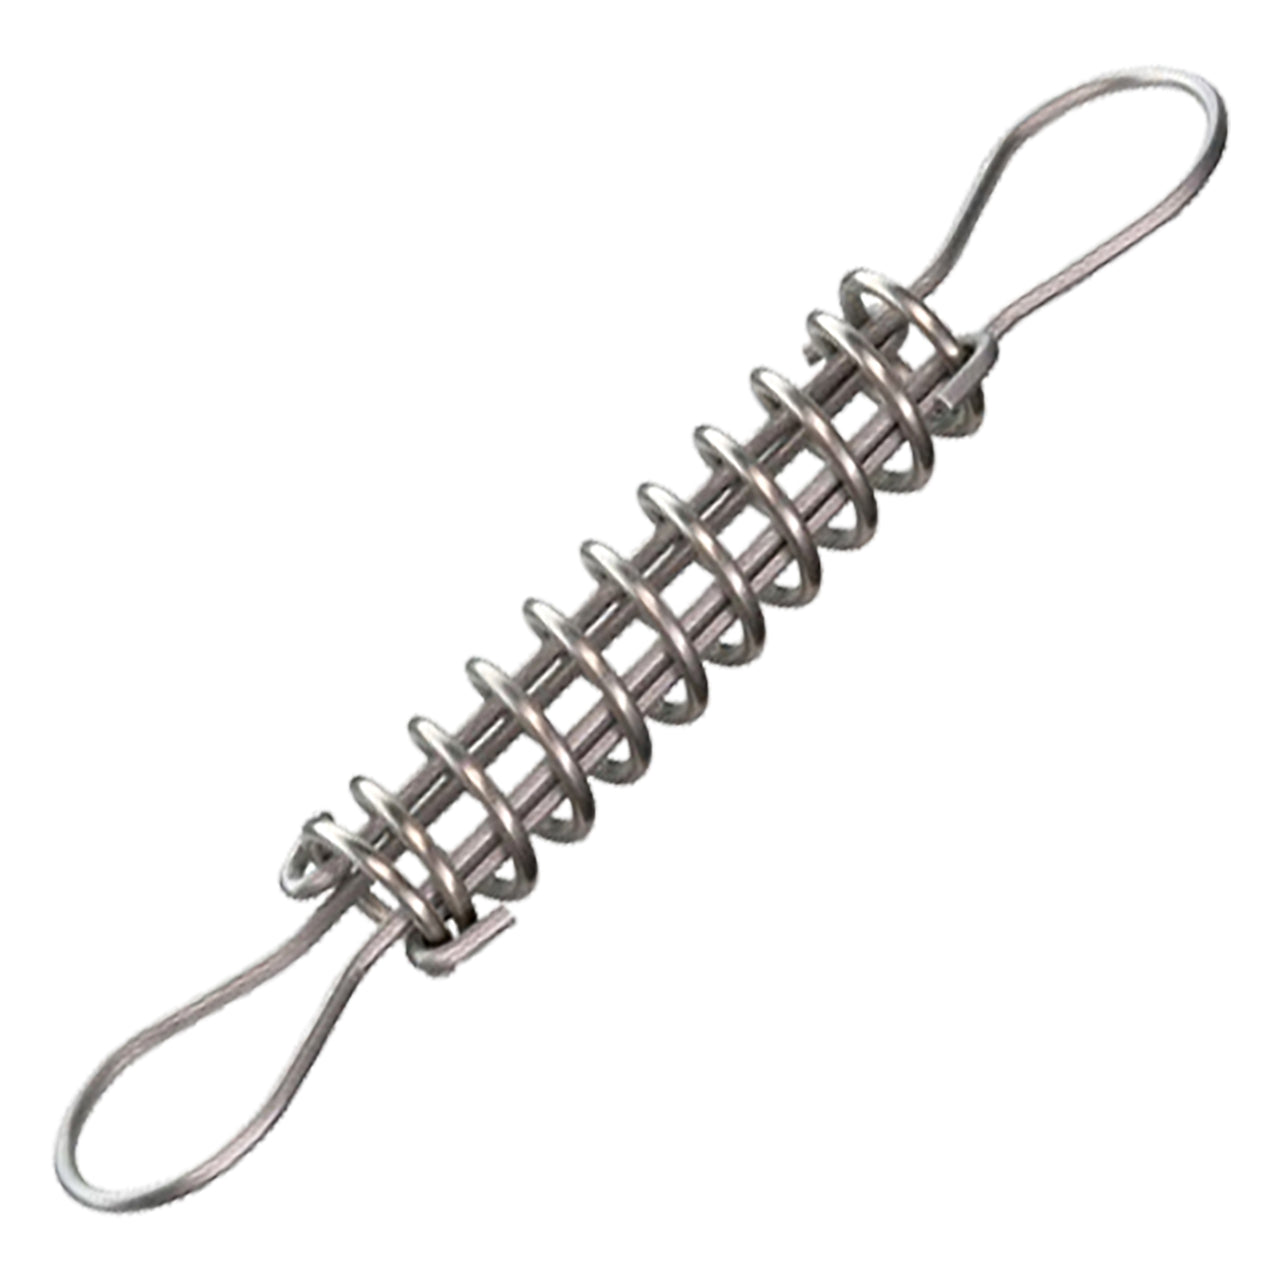 CORRAL equalisation spring - stainless steel